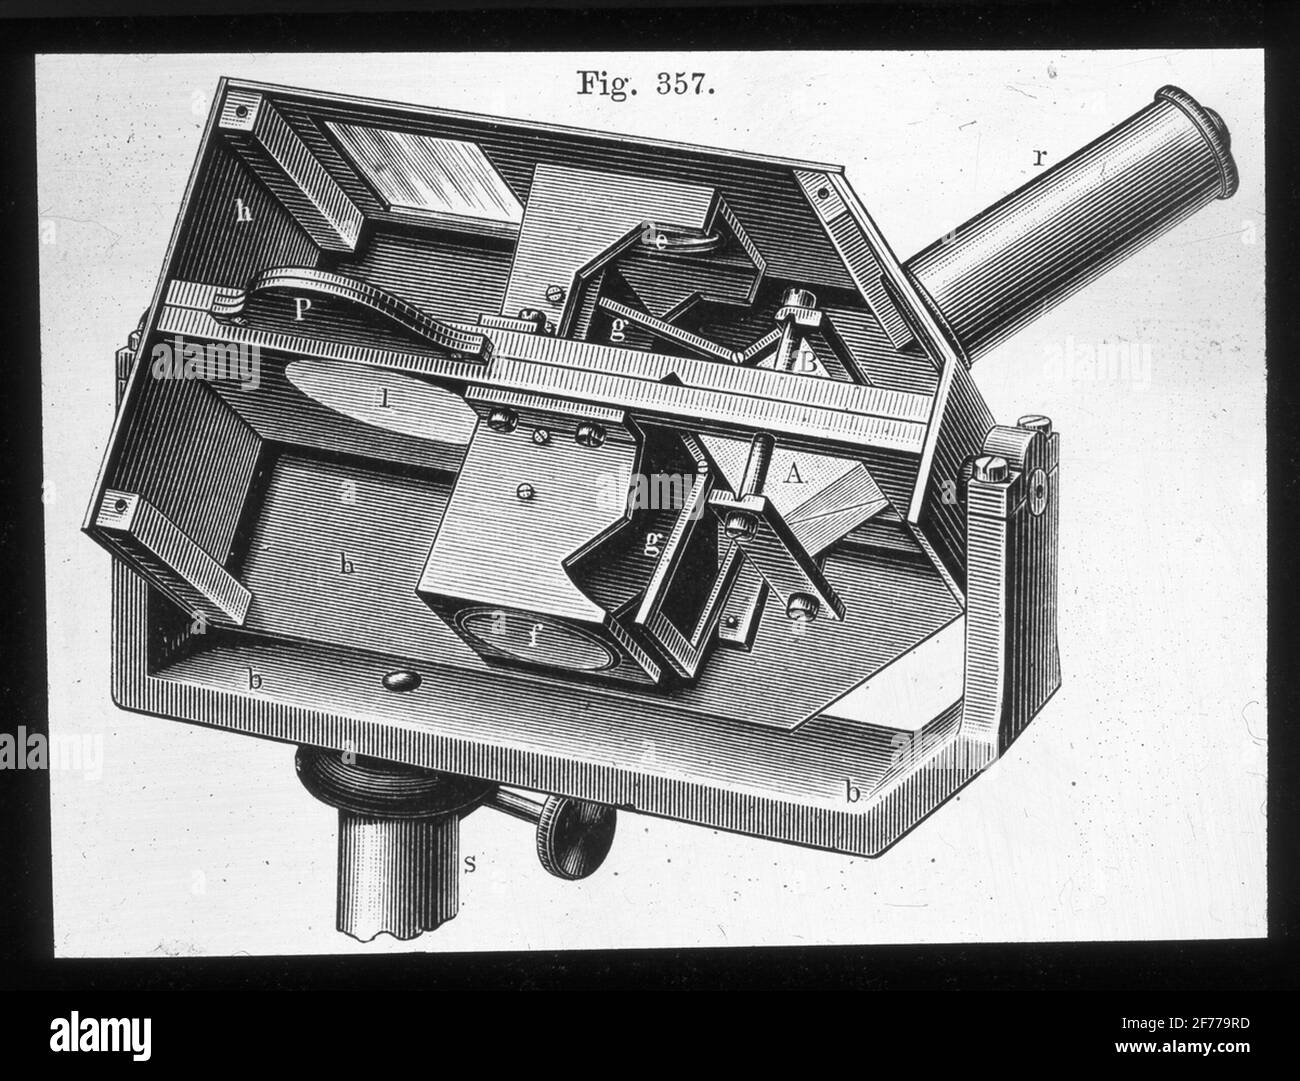 Skiopticon image from the Department of Photography at the Royal Institute of Technology. Use by Professor Helmer Bäckström as lecture material. Bäckström was Sweden's first professor in photography at the Royal Institute of Technology in Stockholm 1948-1958.Lummer-Brudhuns photometer.For more info SE: Chuwolen p. 357? Stock Photo